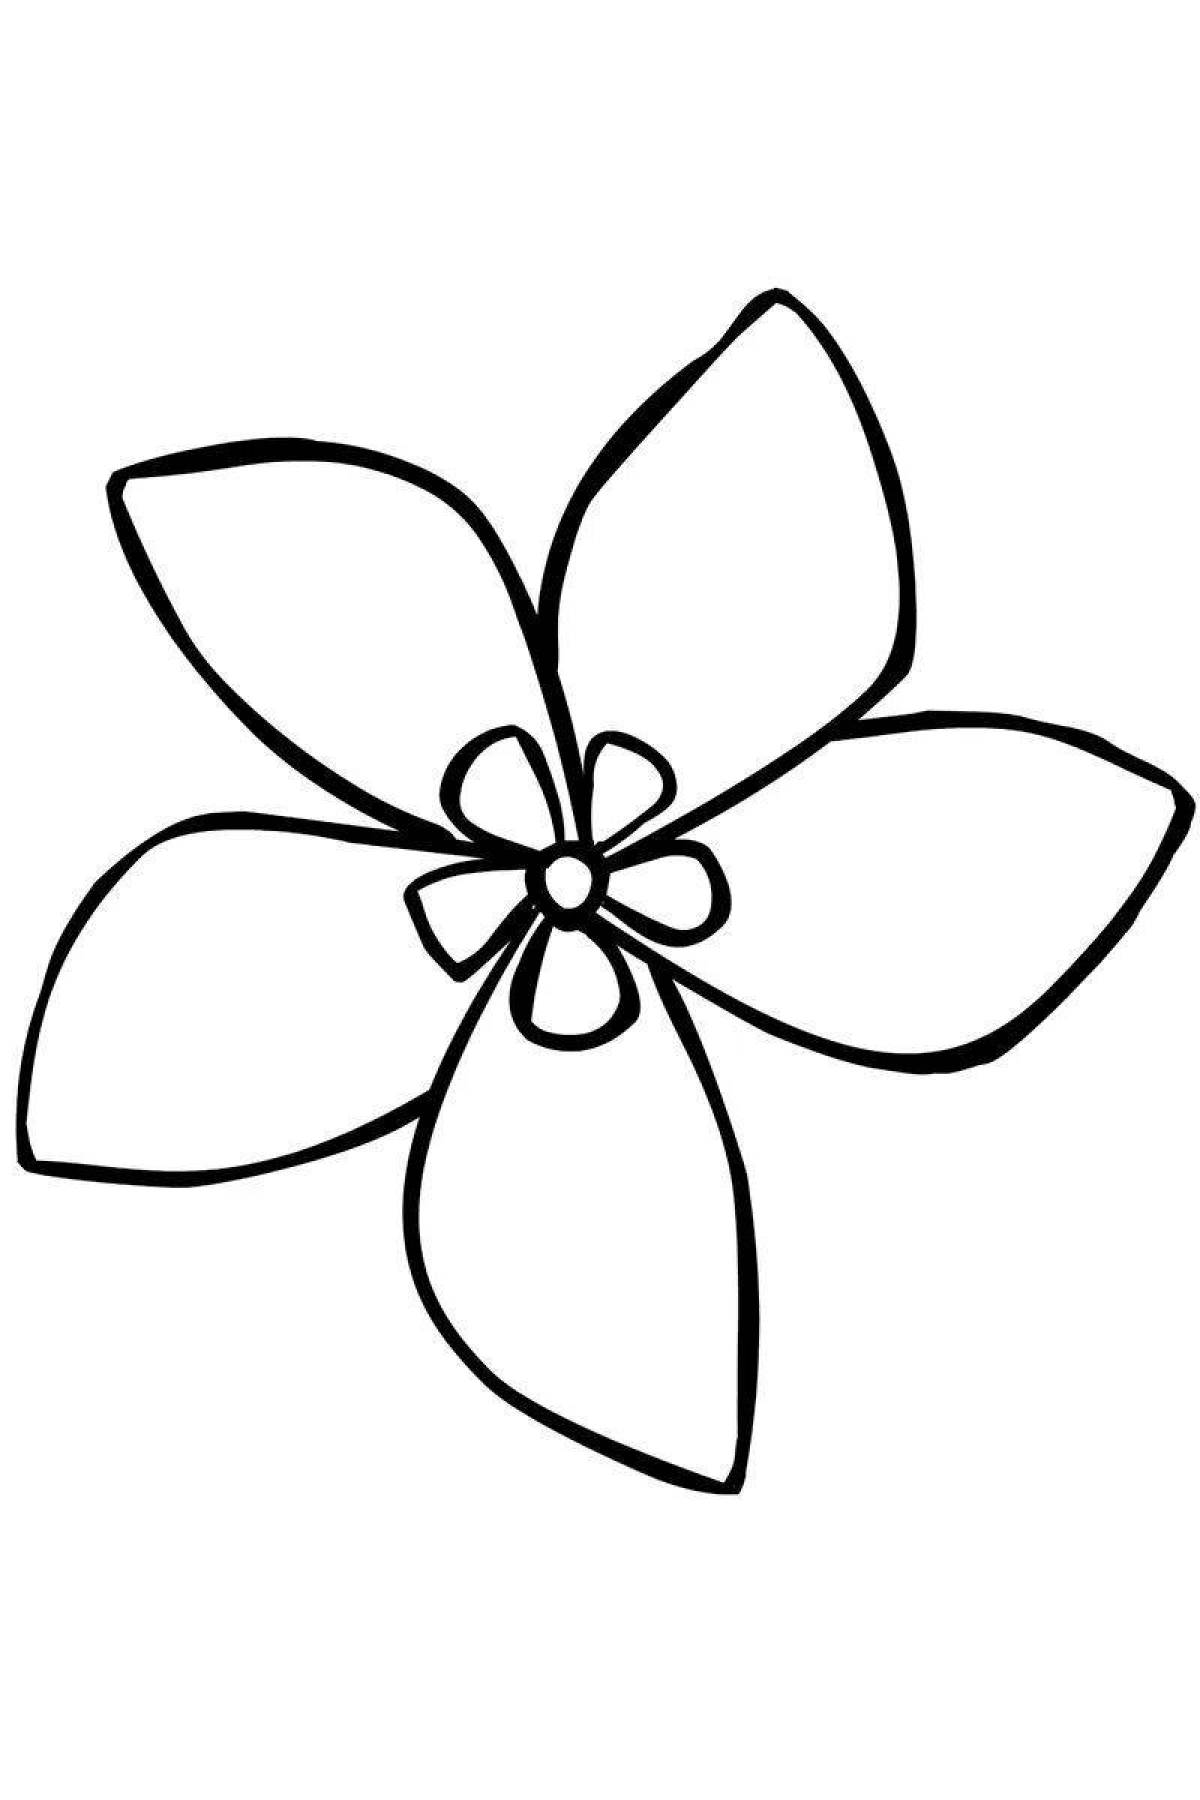 Little flowers coloring pages